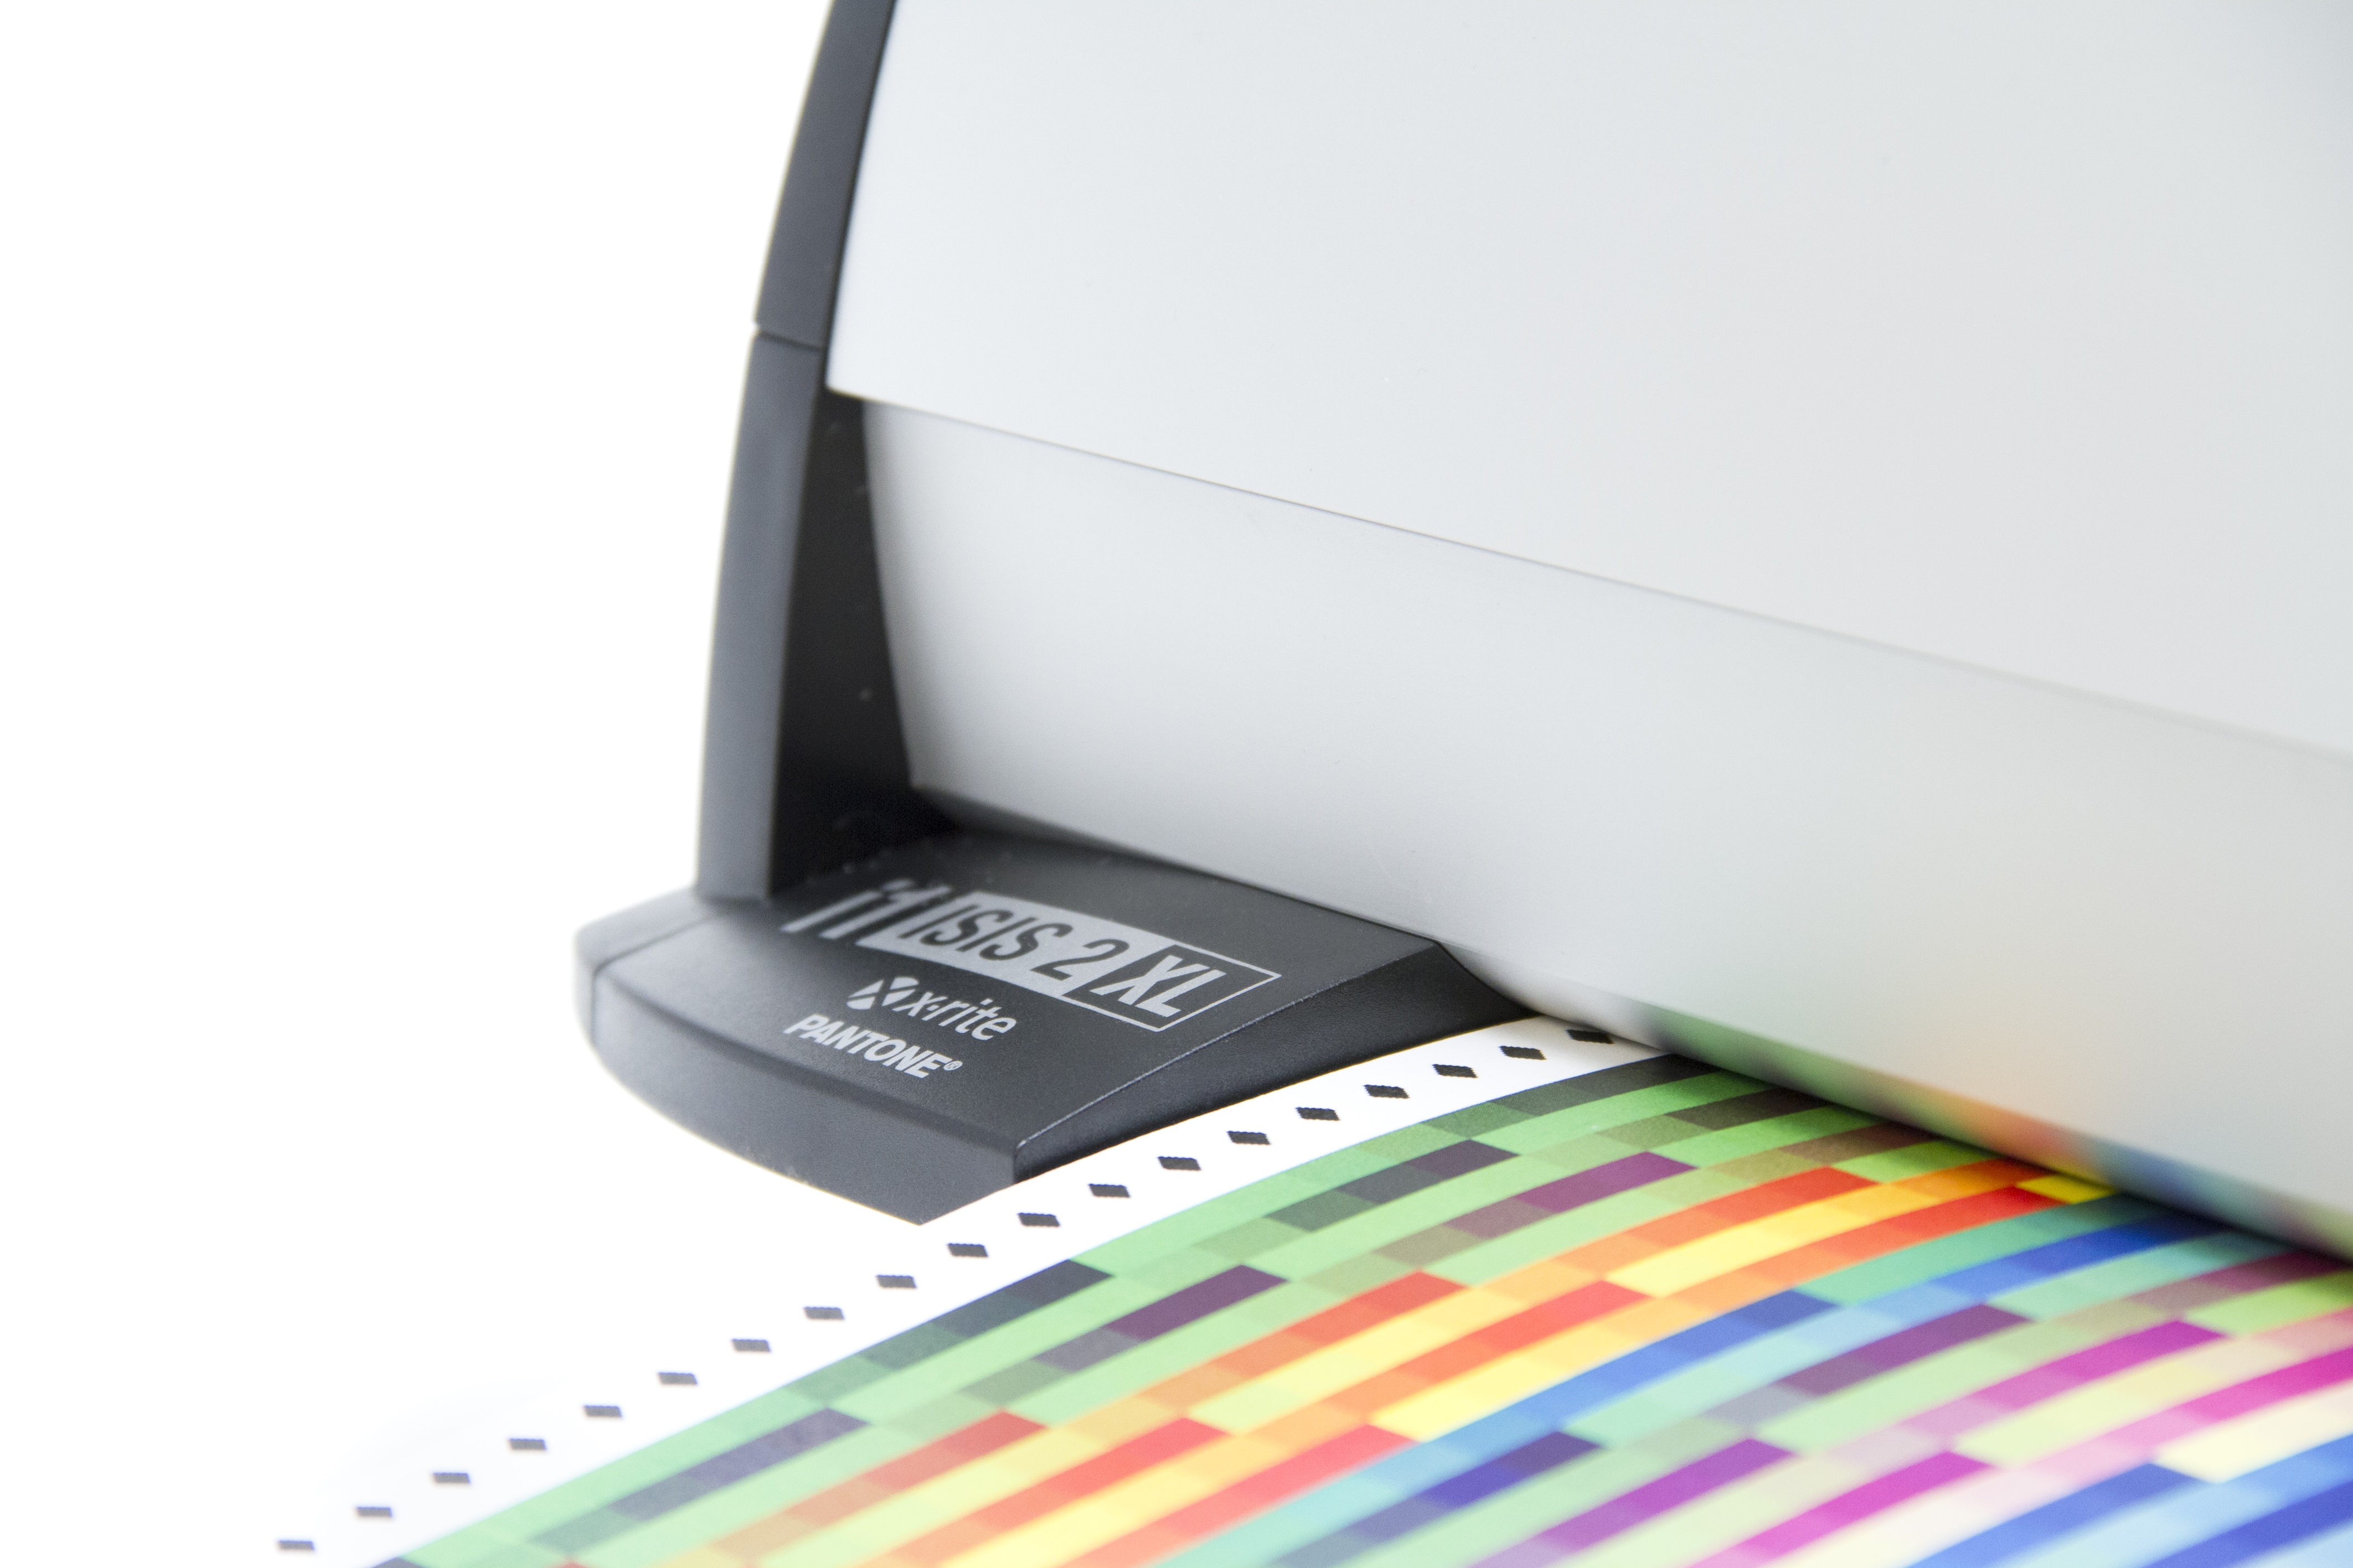 The i1iSis 2 XL reads up to 2,500 patches on a single A3/Tabloid sheet in just 10 minutes.